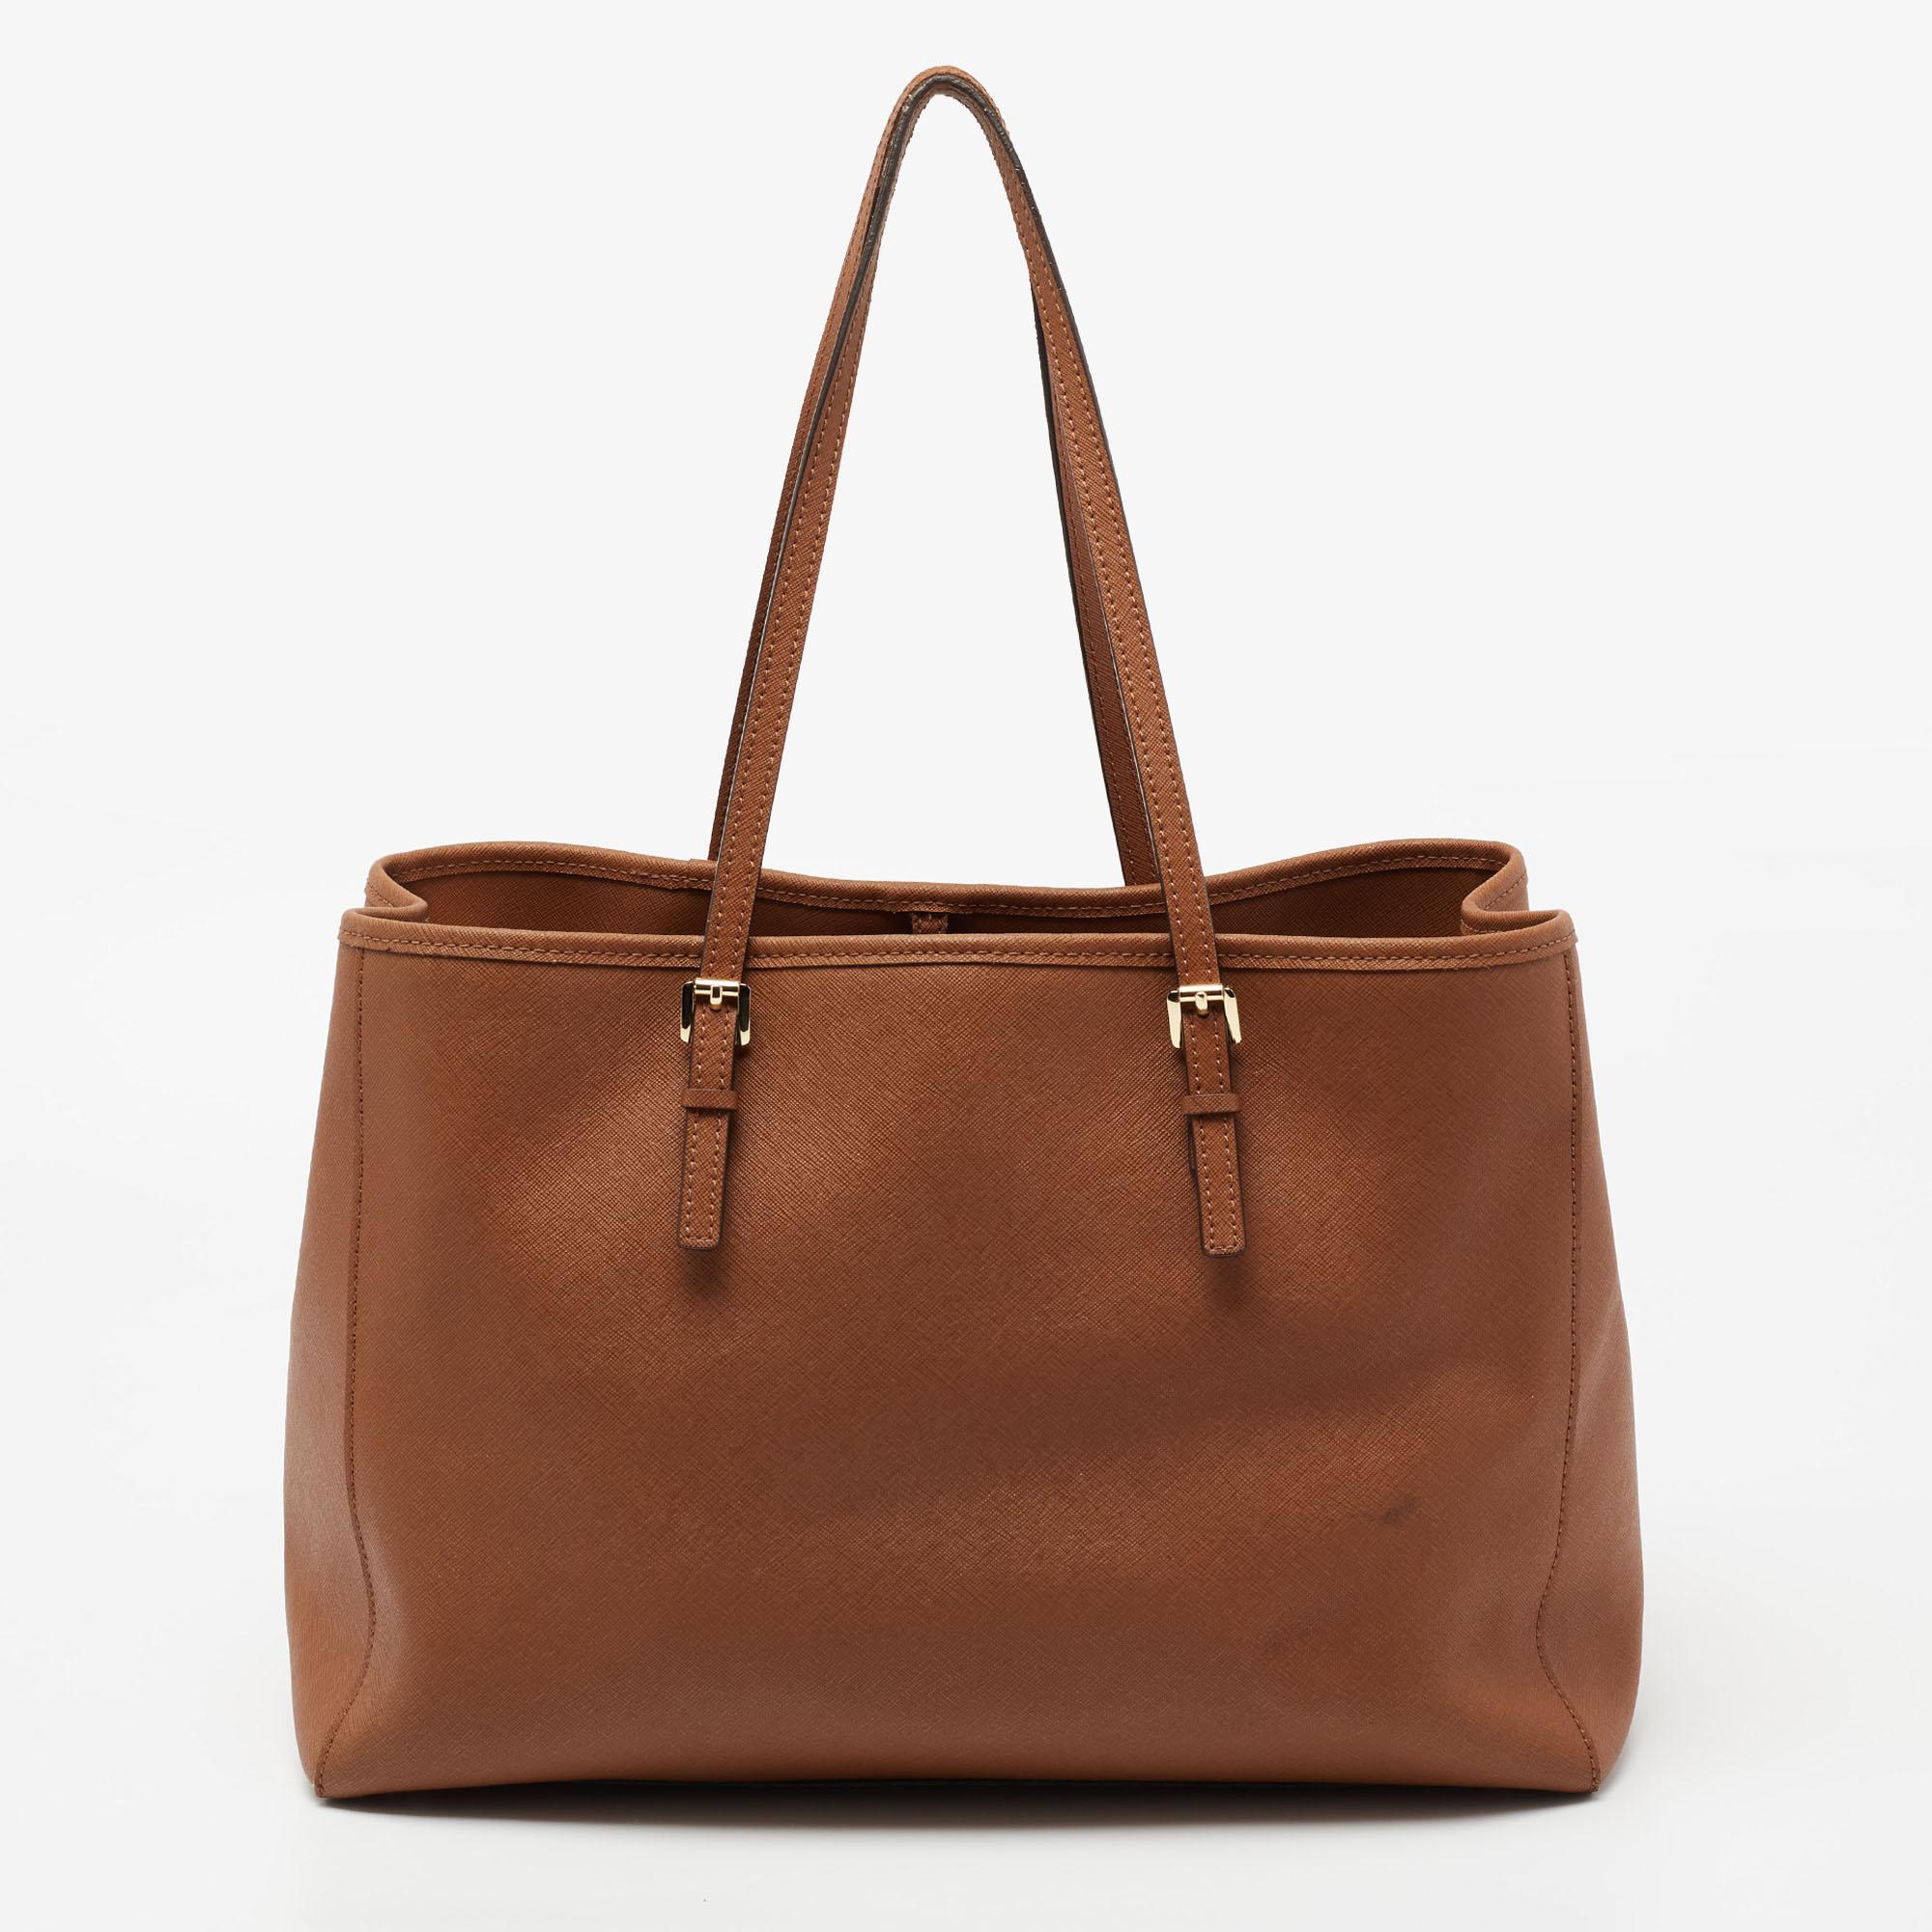 This Michael Kors Jet Set Travel tote aims to provide you with practical ease. With a beautiful design and striking structure, this Saffianoleather bag is filled with functional details. It exhibits dual handles at the top for you to carry it in a